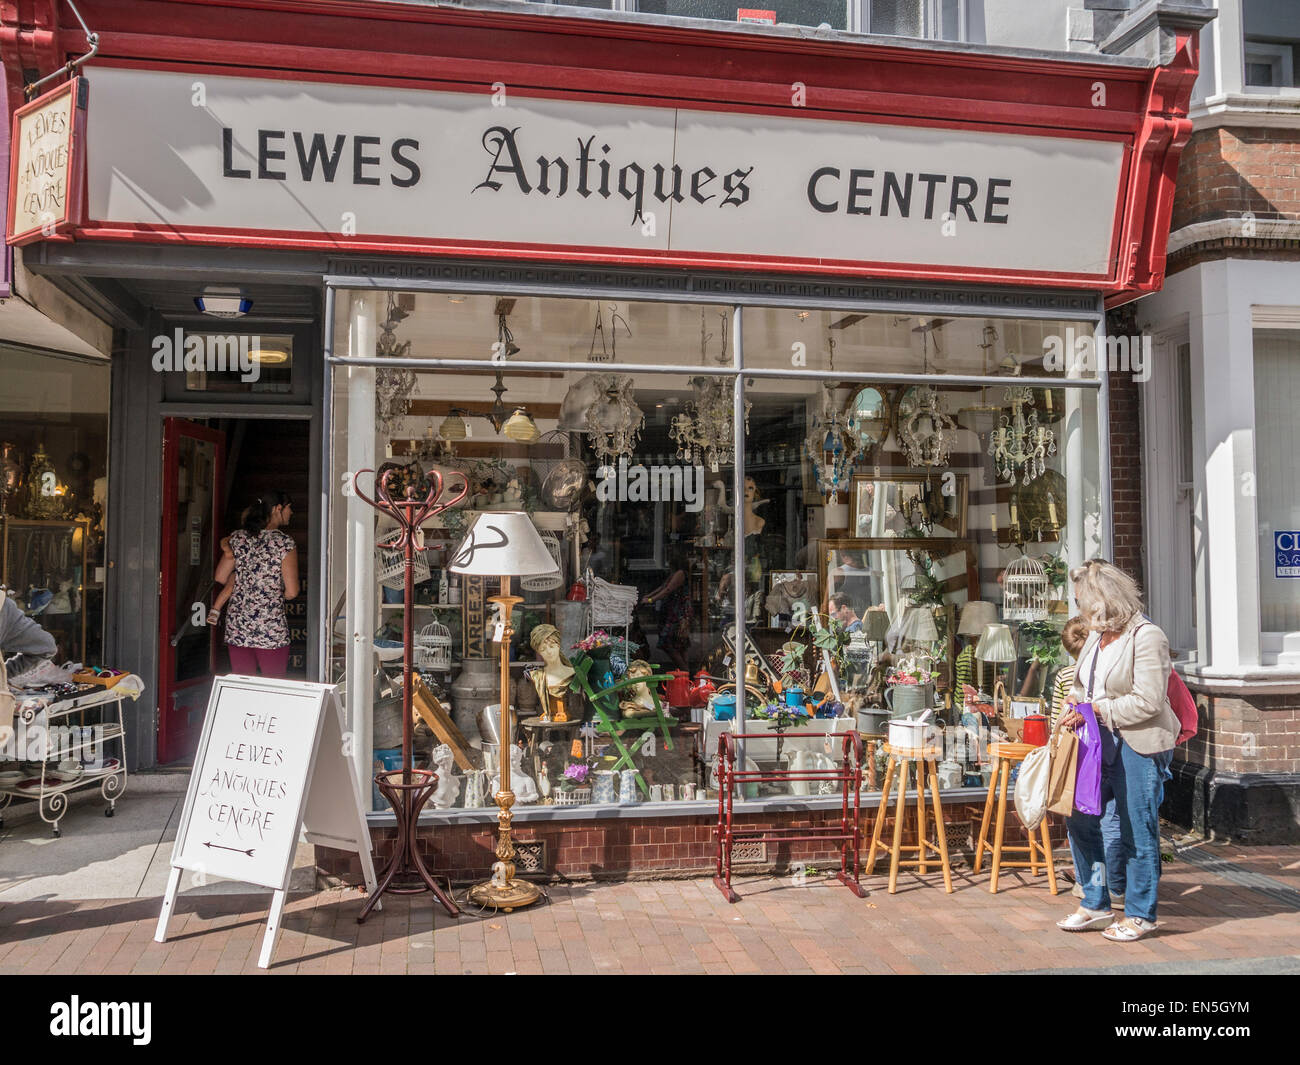 An antique shop in Cliffe High Street and Foundry Lane in Lewes, East Sussex, southern England. Stock Photo